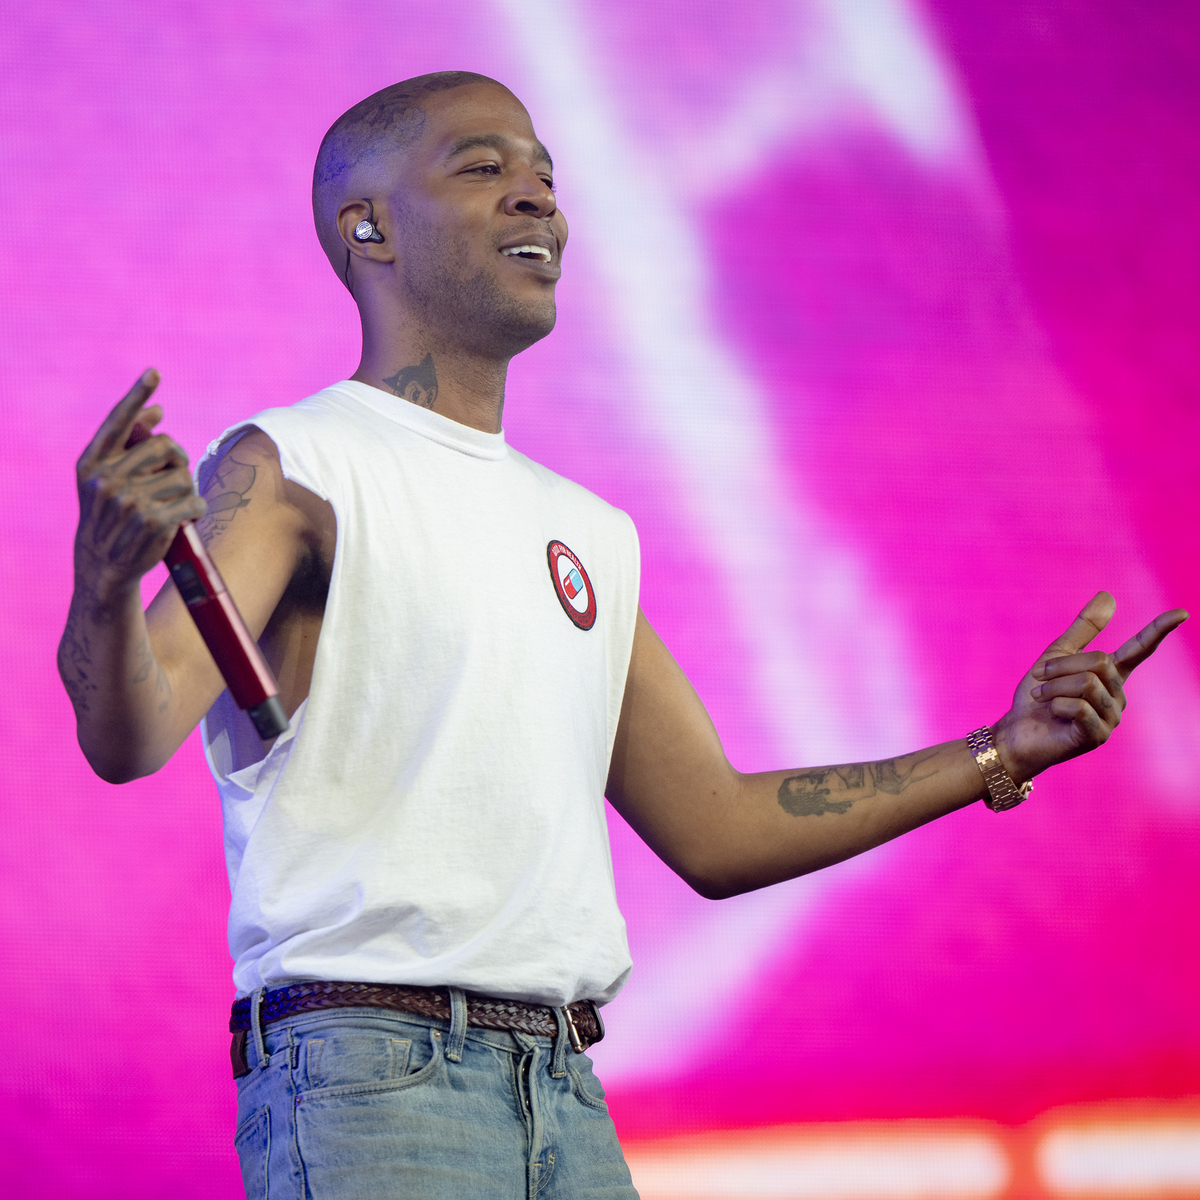 Kid Cudi Breaks His Foot After Leaping Off Coachella Stage